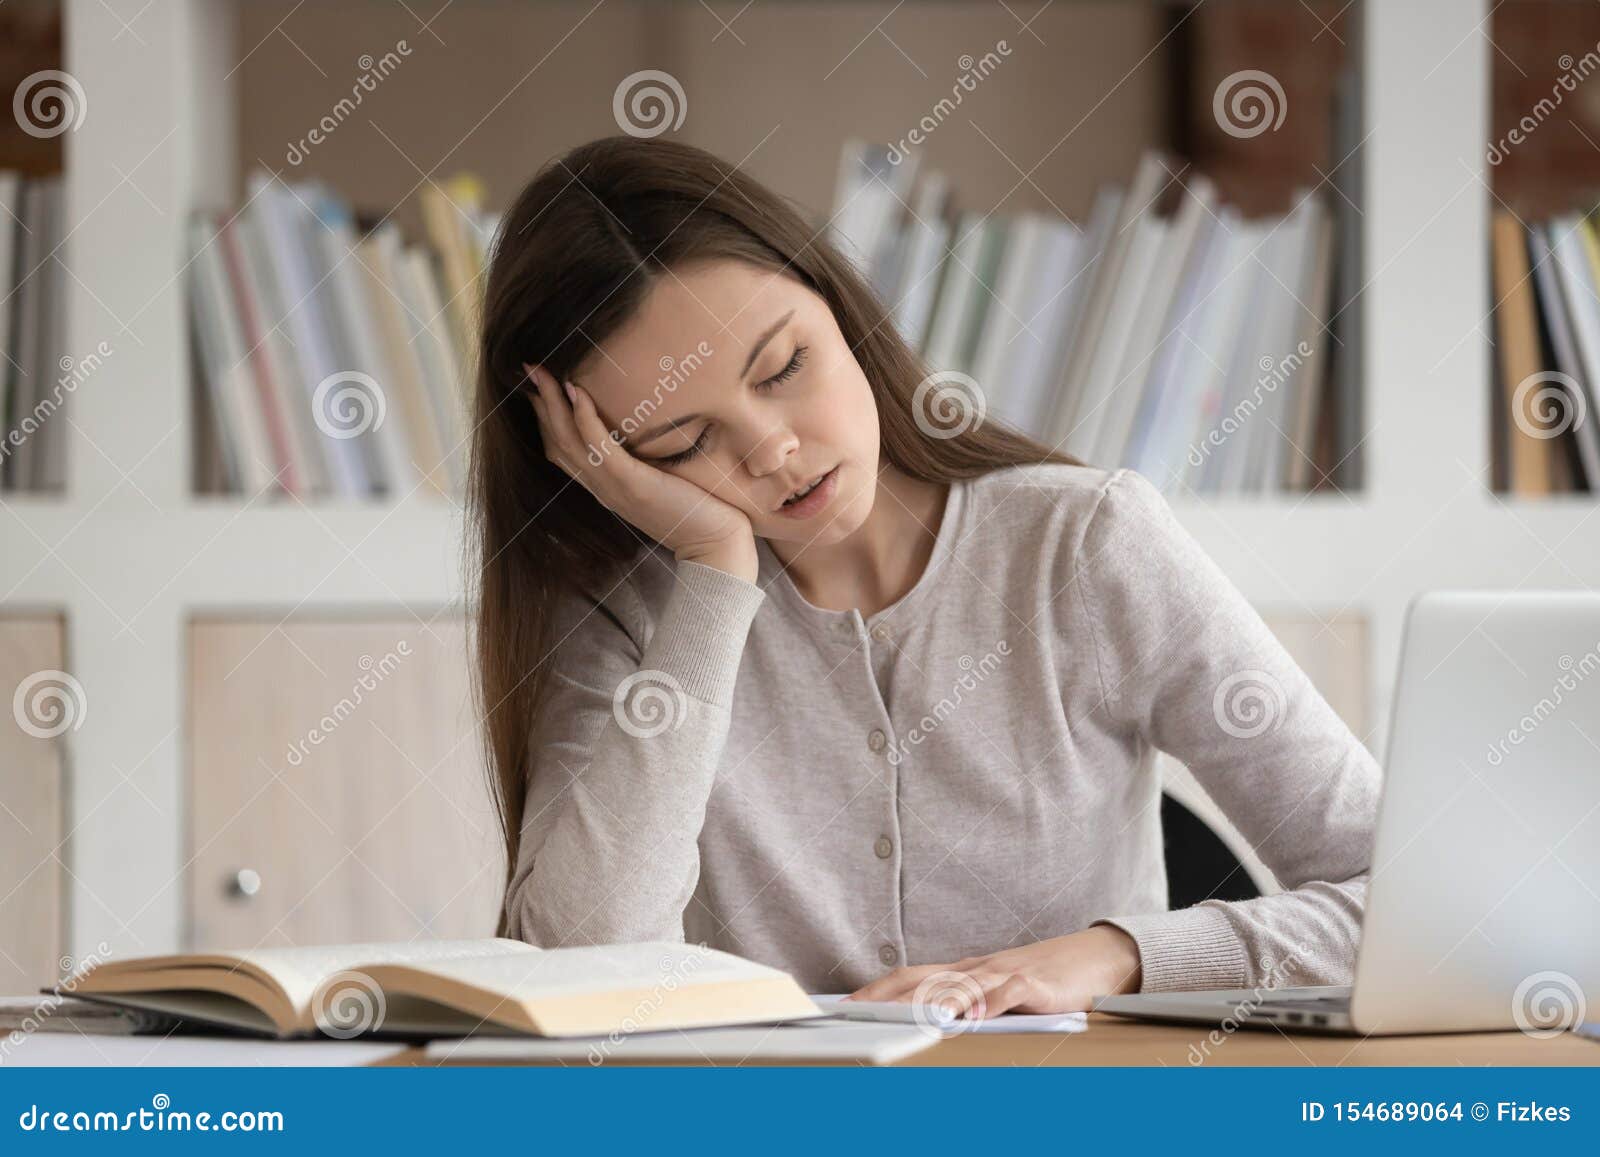 Tired Girl Student Fall Asleep Studying At Workplace Stock Photo